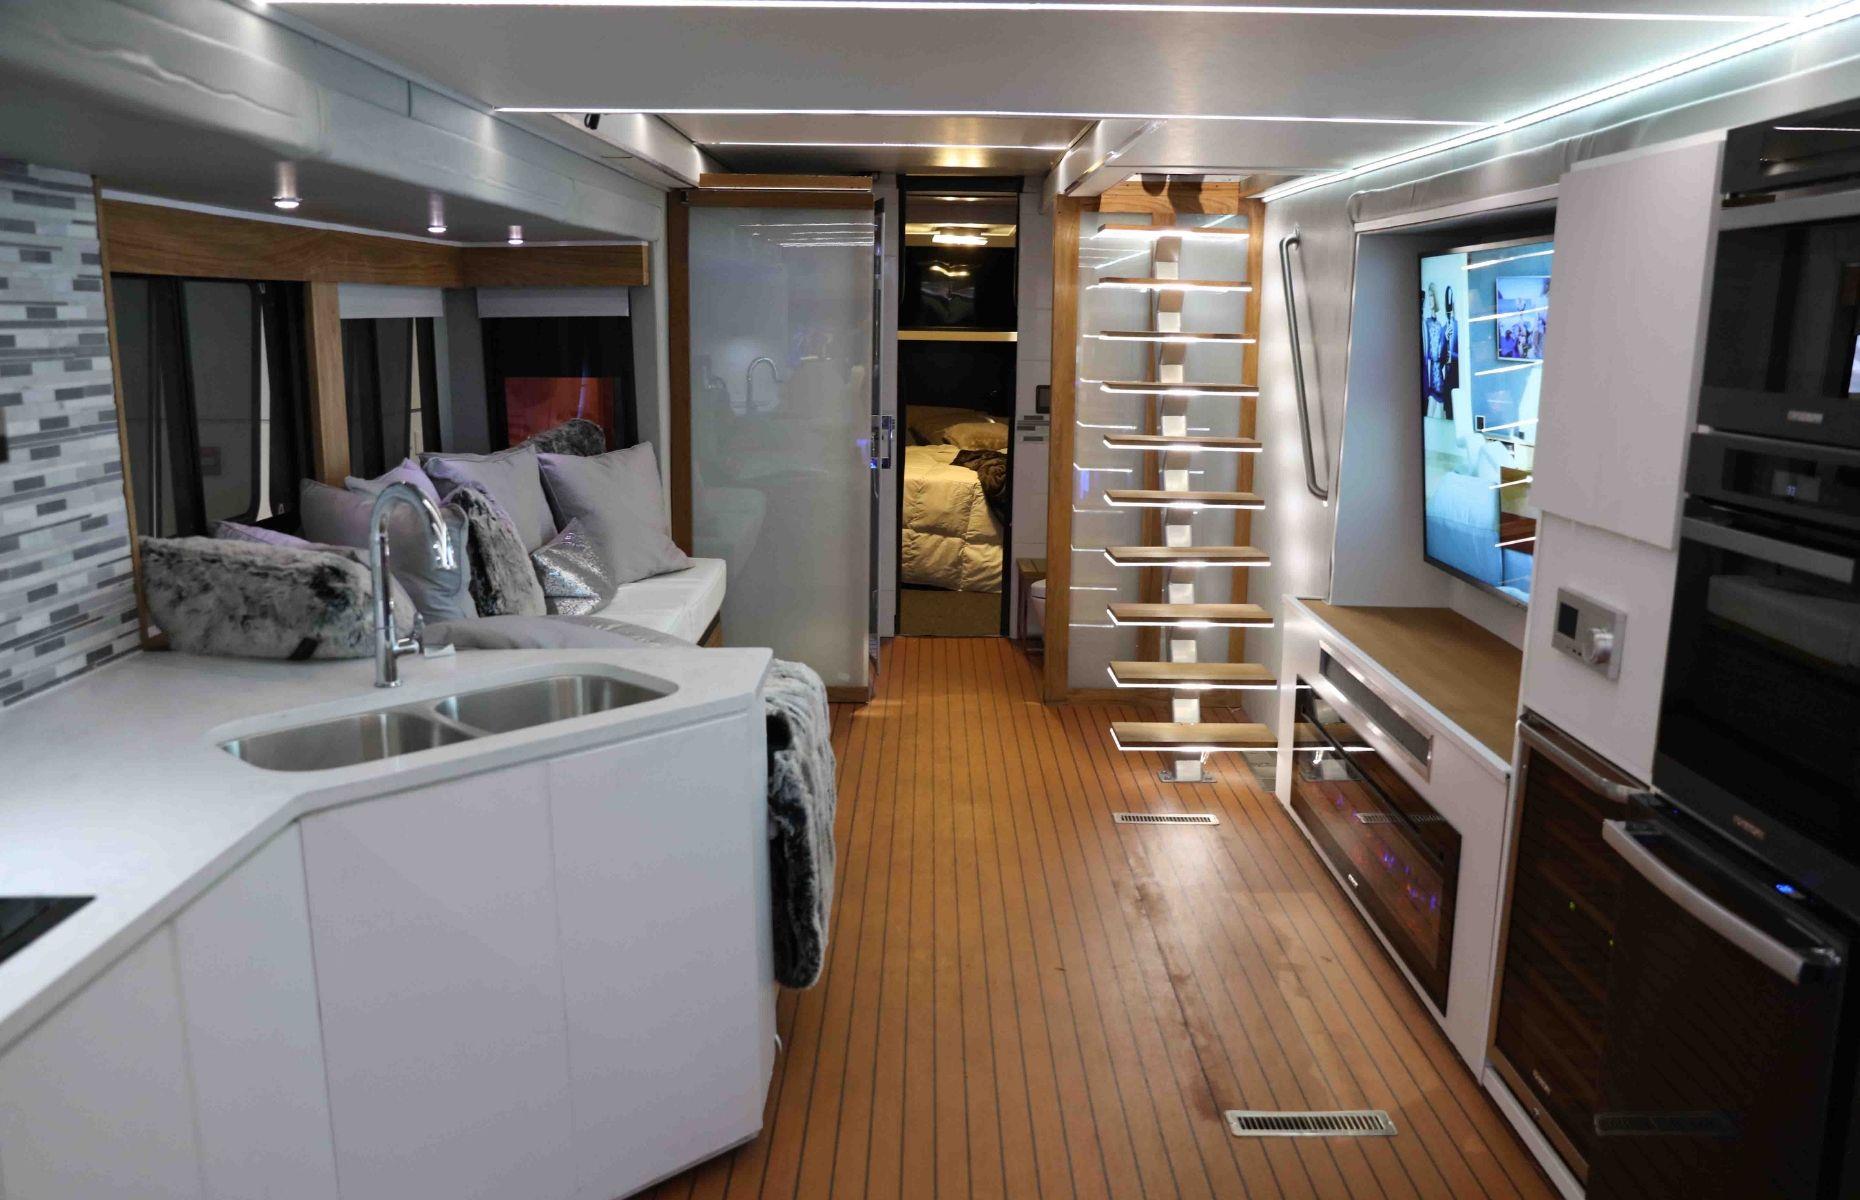 Unsurprisingly, the interior of the concept RV is equally as impressive as the exterior, thanks to its state-of-the-art kitchen, 75-inch TVs, top-of-the-line surround sound system, atmospheric mood lighting, French doors and wine fridge.